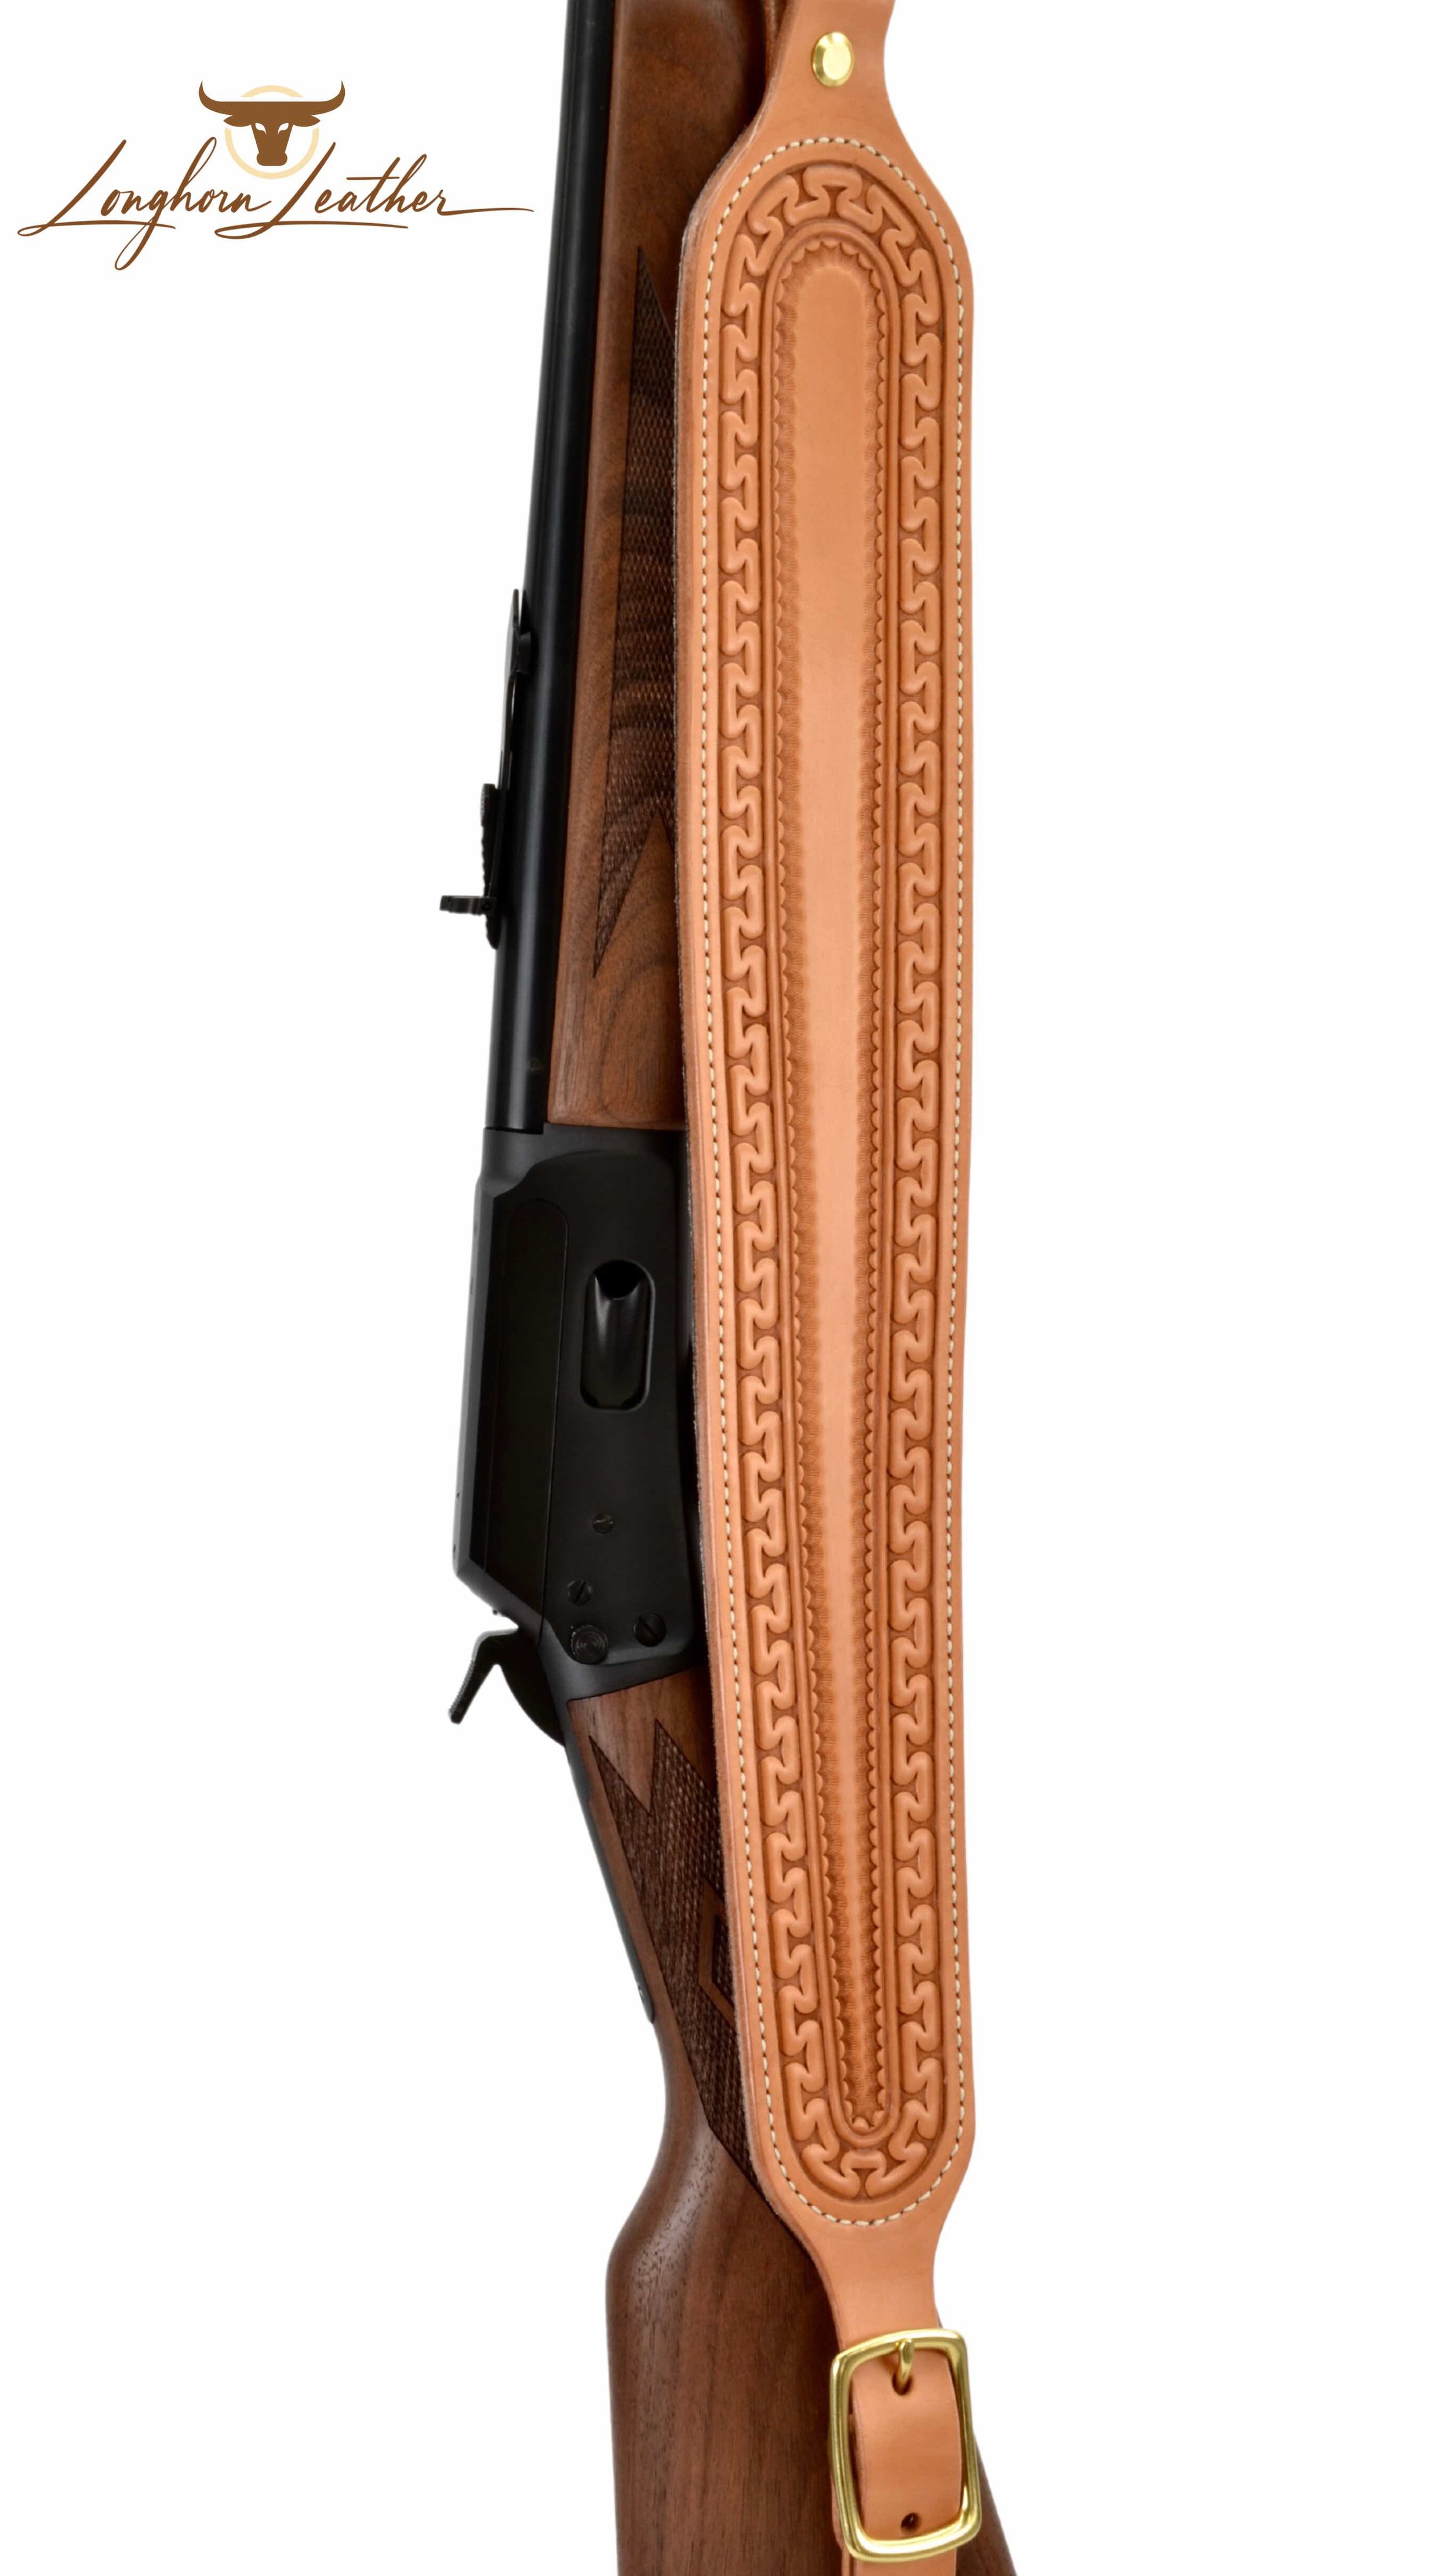 Custom leather rifle sling featuring the Yuma design.  Individually handcrafted at Longhorn Leather AZ